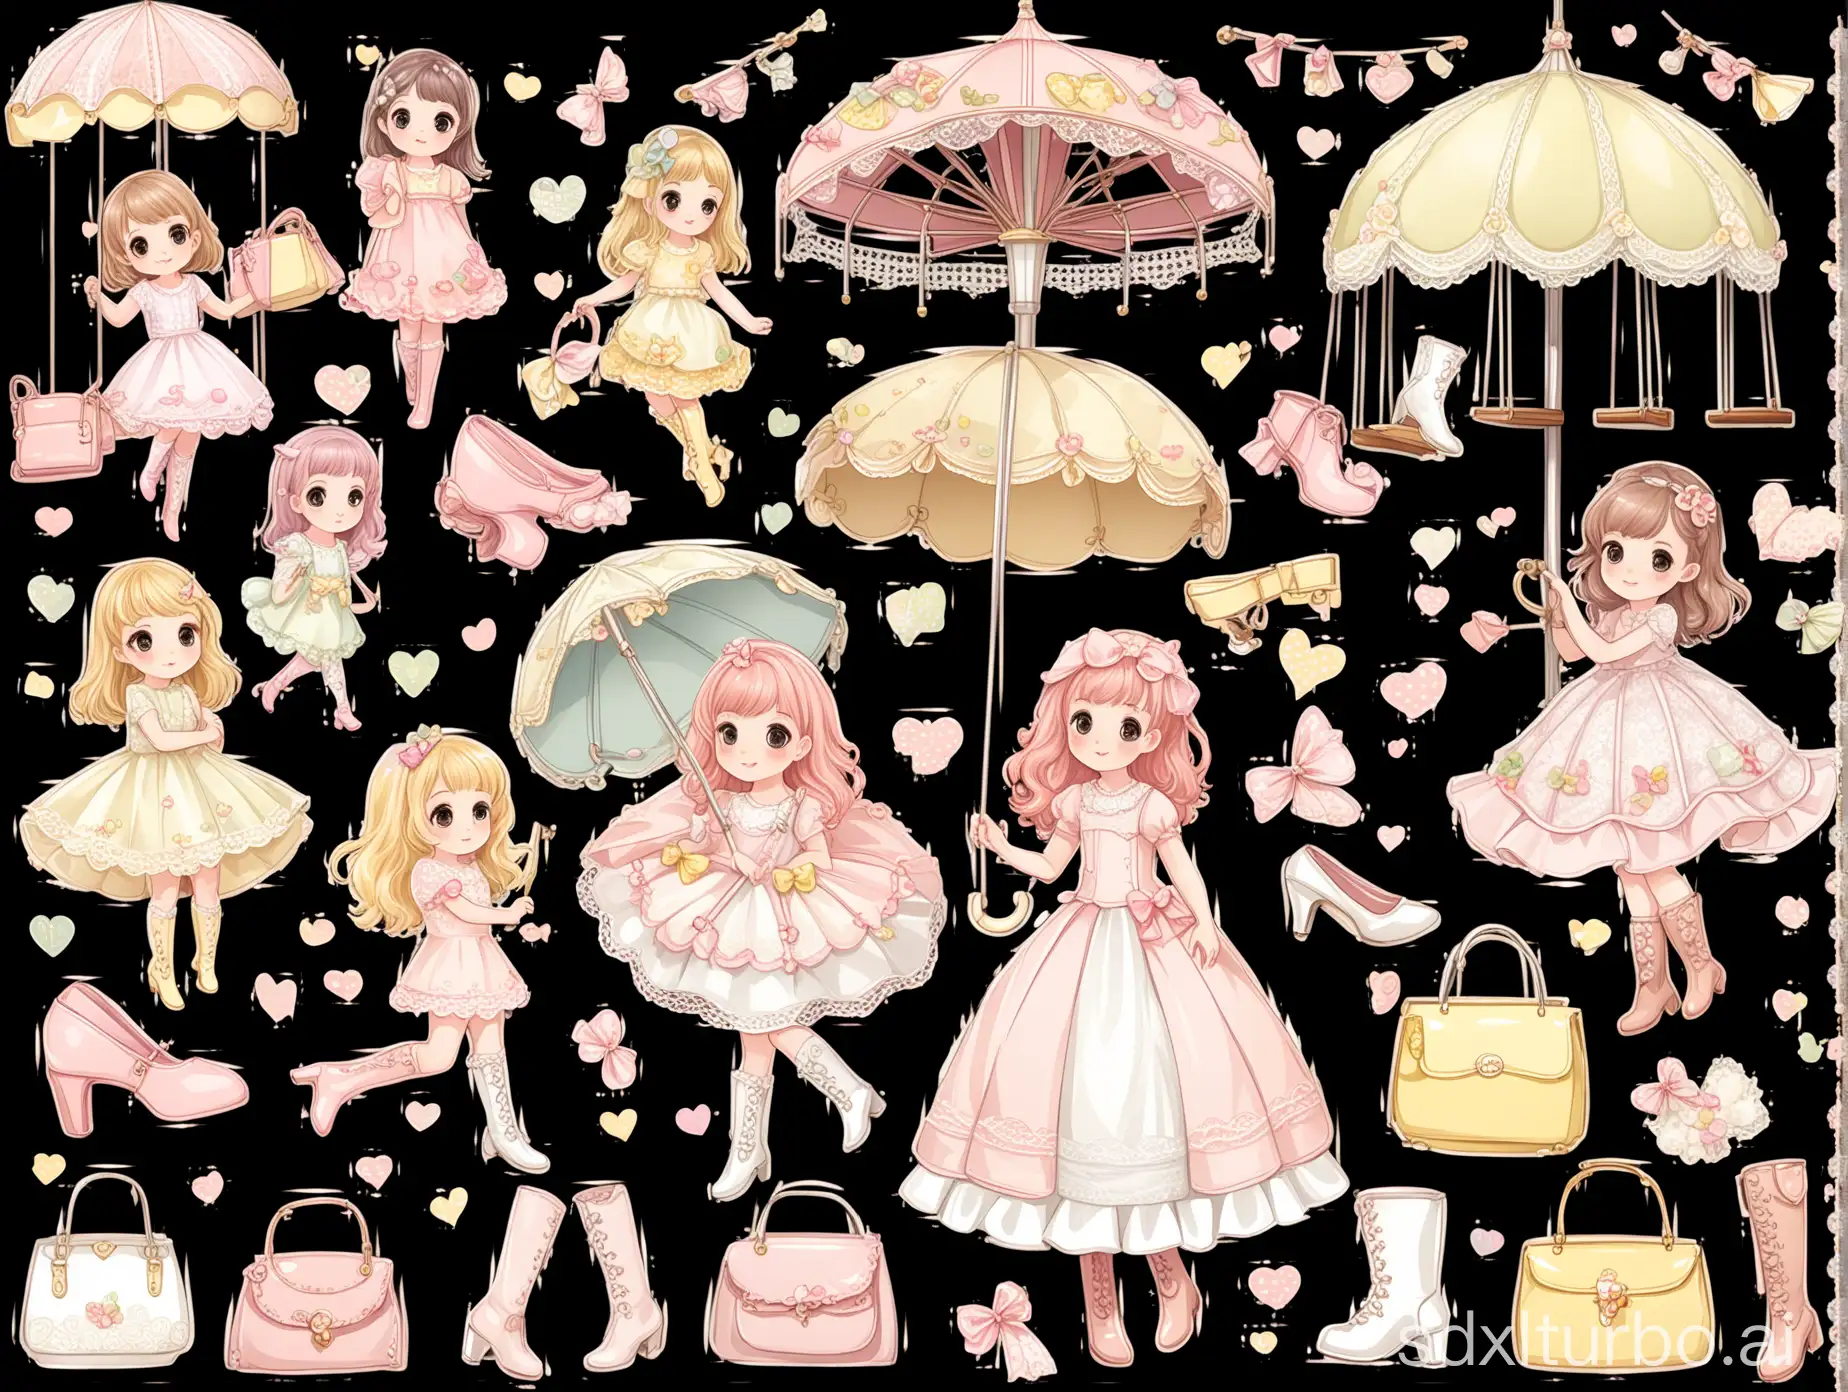 A set of transparent background sticker patterns in a romantic style, mainly light pink and light yellow, featuring cute and sweet little girls, lace parasols, high-heeled shoes, riding boots, handbags, swings, carousels, etc.